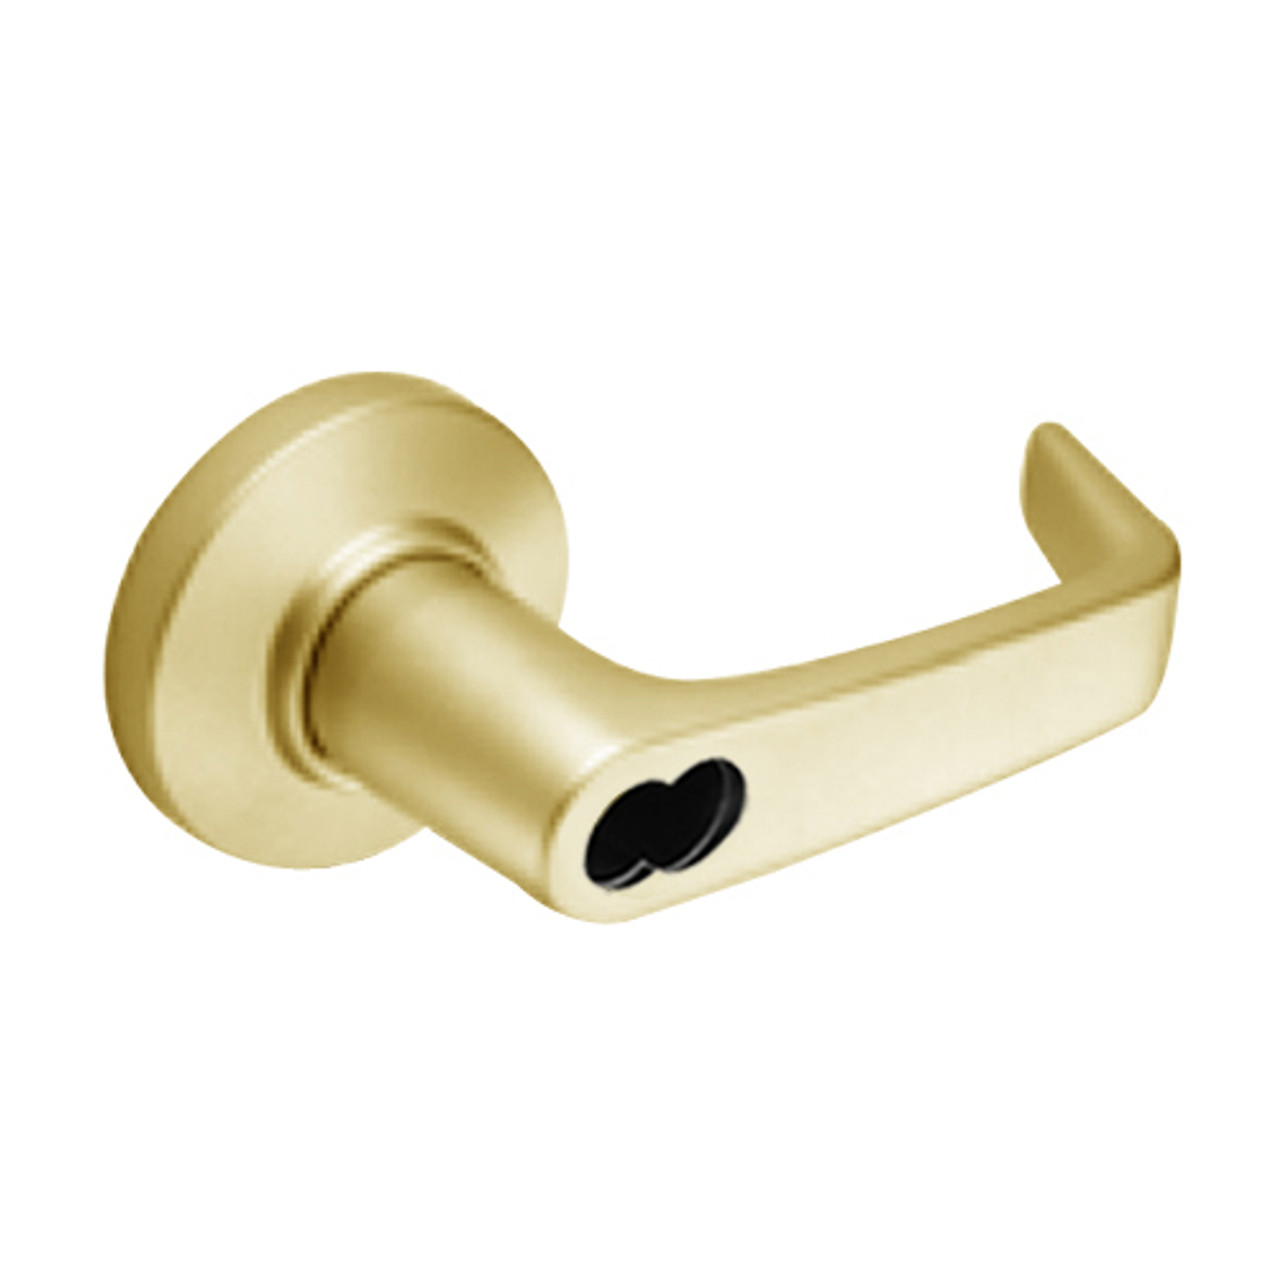 9K37DR15CSTK605 Best 9K Series Special Function Cylindrical Lever Locks with Contour Angle with Return Lever Design Accept 7 Pin Best Core in Bright Brass